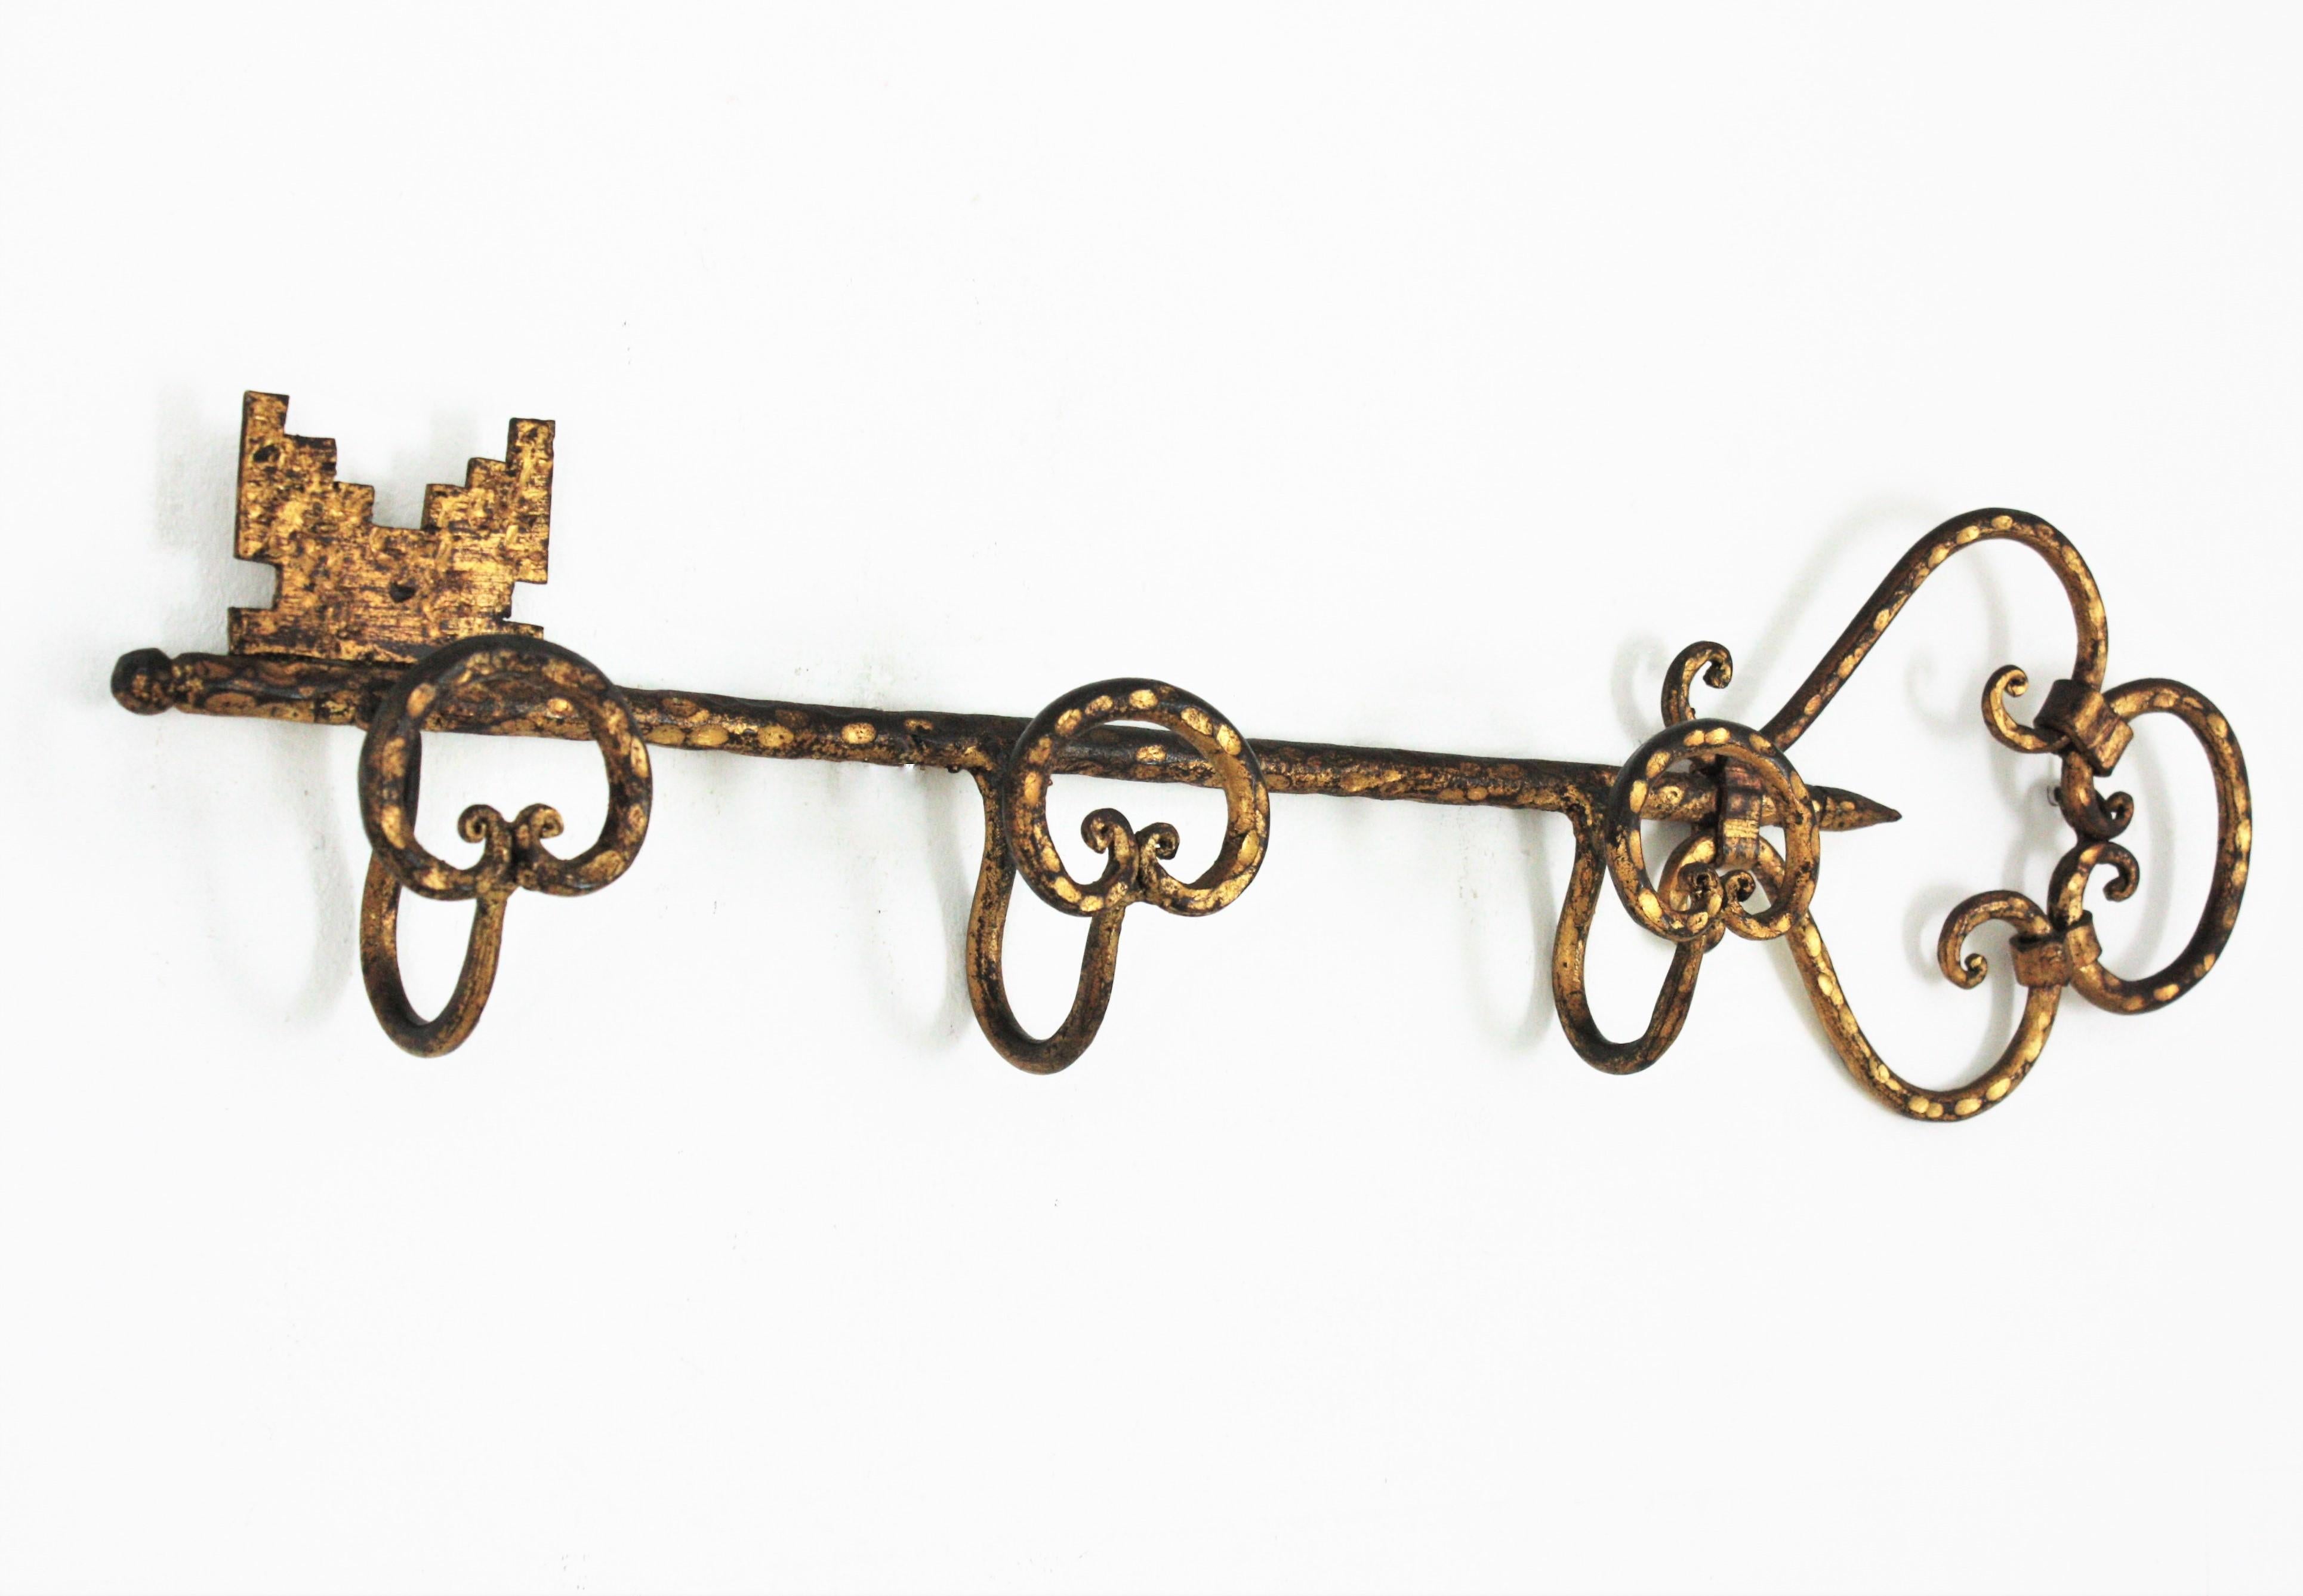 Eye-catching gold gilt hand-forged iron coat / hat rack in the form of a giant key. Spain, 1940s
This large key shaped hat and coat rack has 3 large coat hanging hooks. It has a pretty beautiful gothic style design, all made in wrought iron. It is